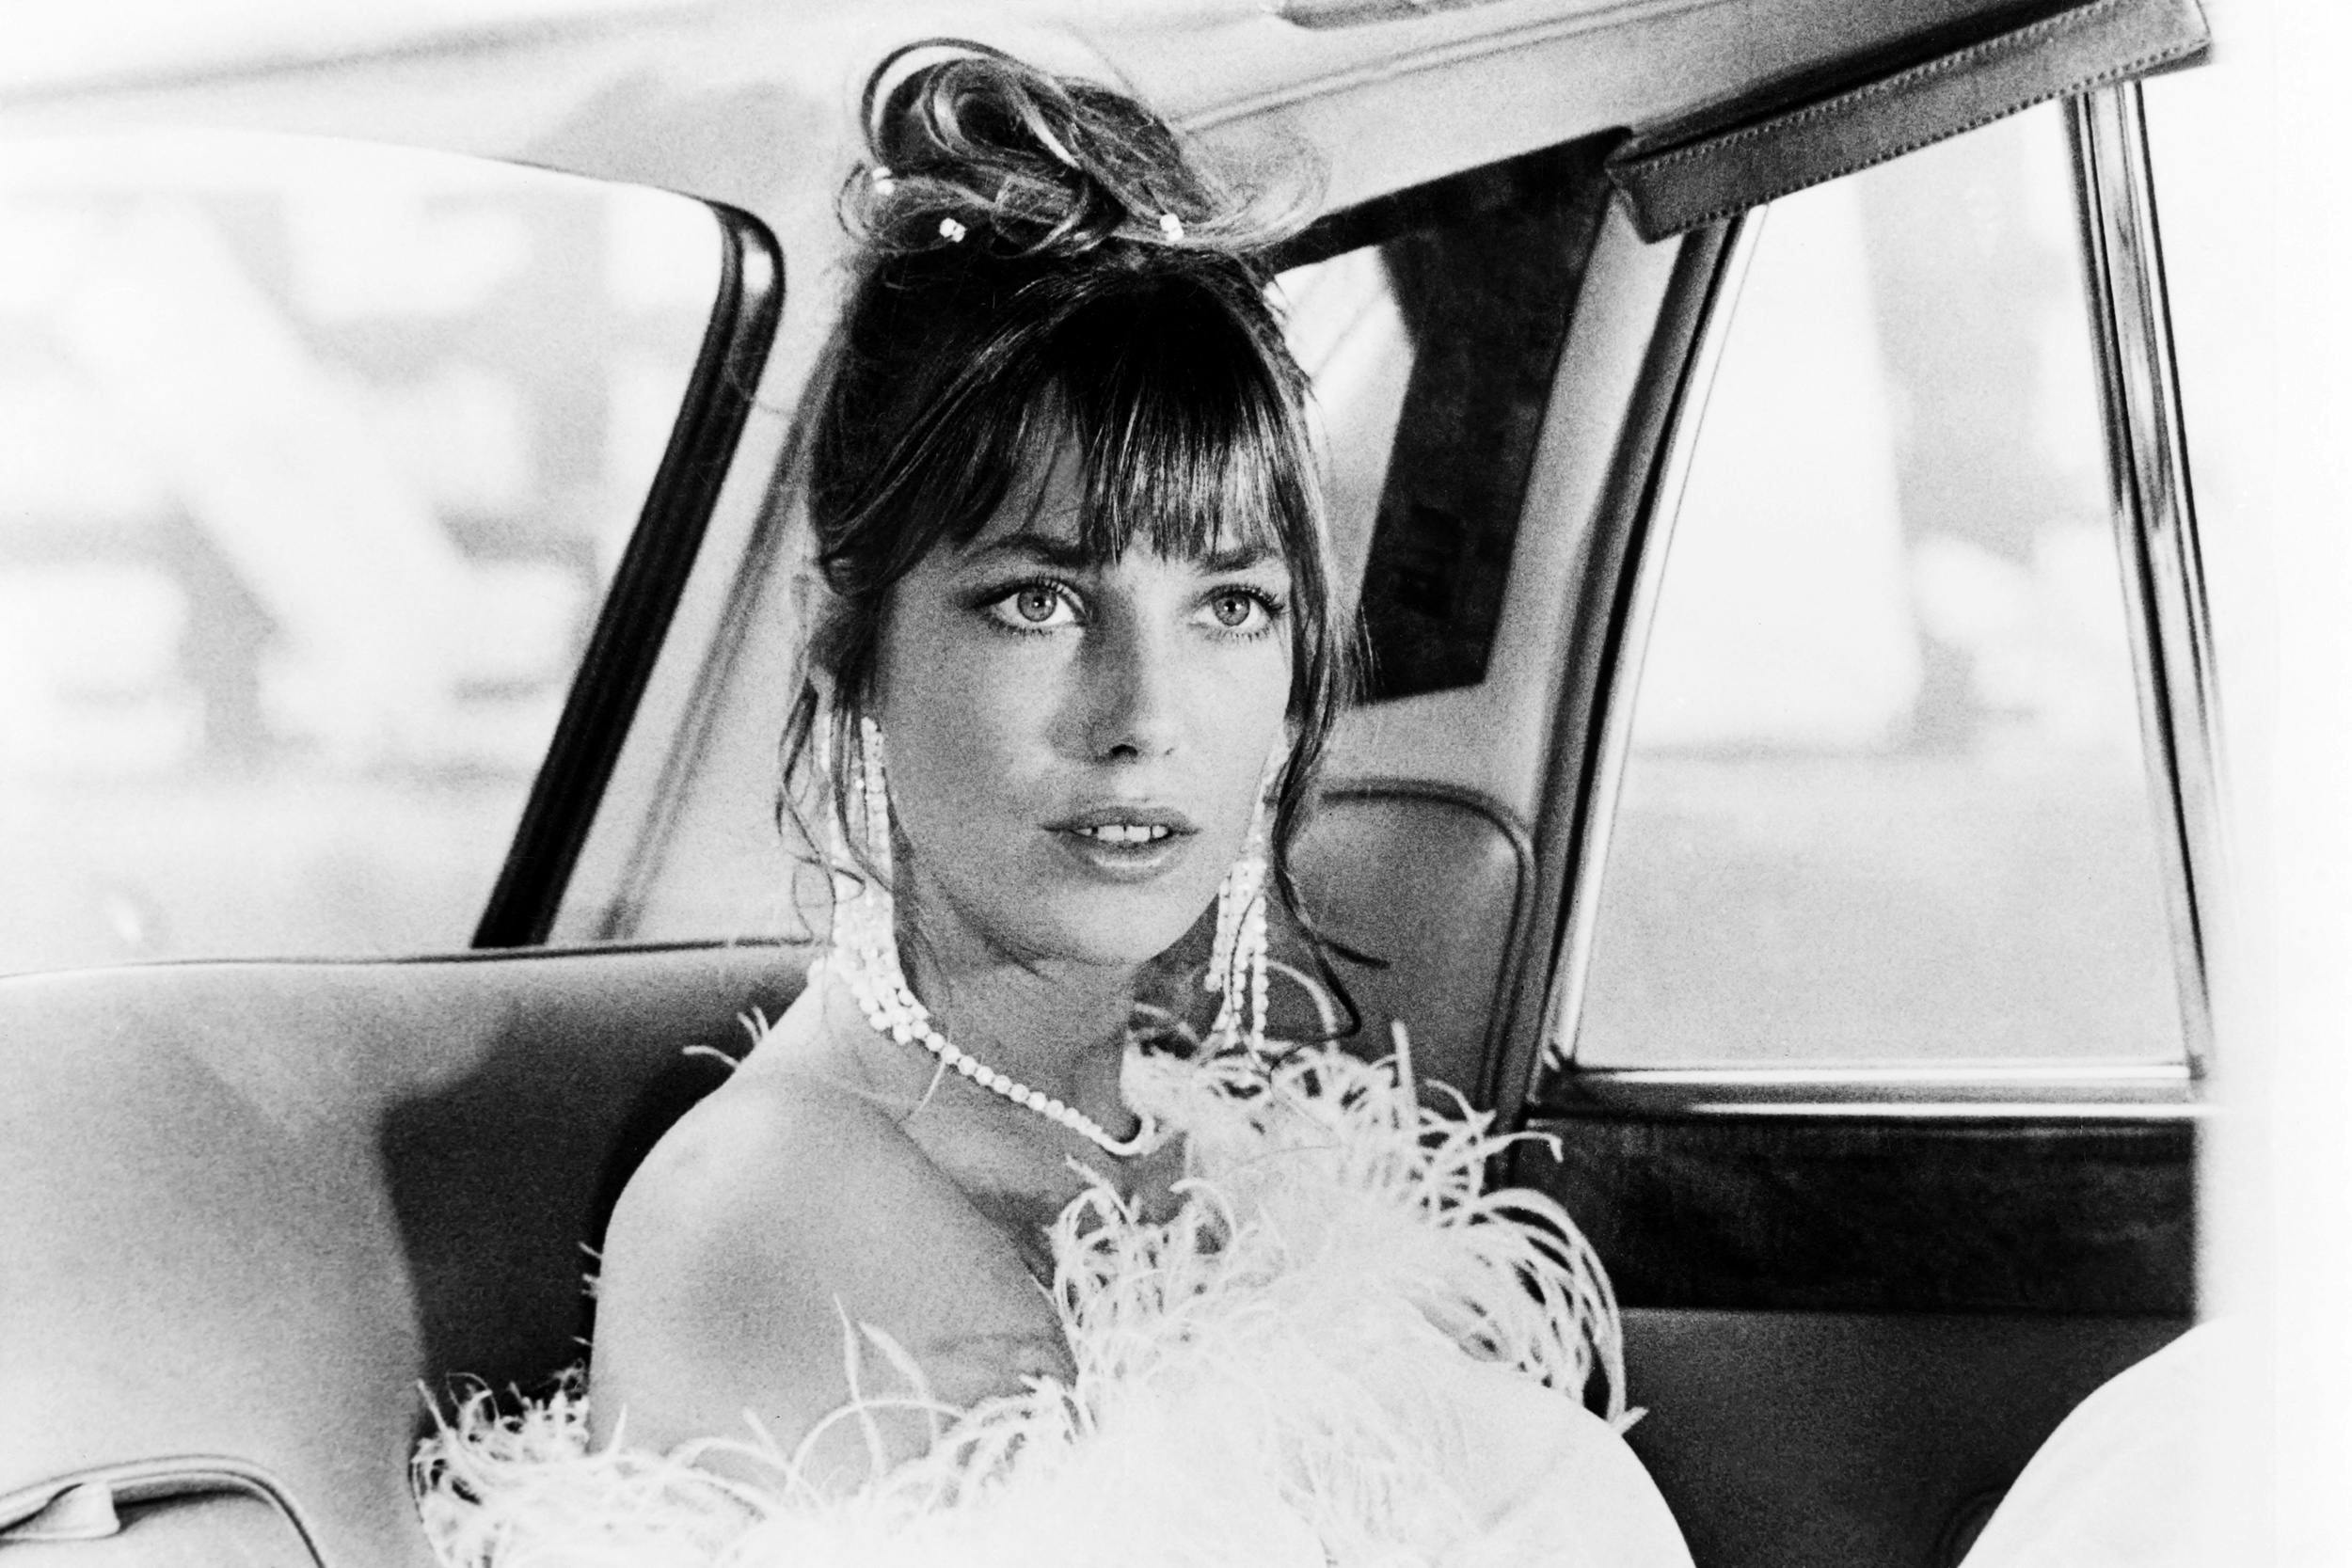 actress black and white picture cinema film filming horizontal in the car person-music paris person photography portrait necklace dress adult bride female woman gown